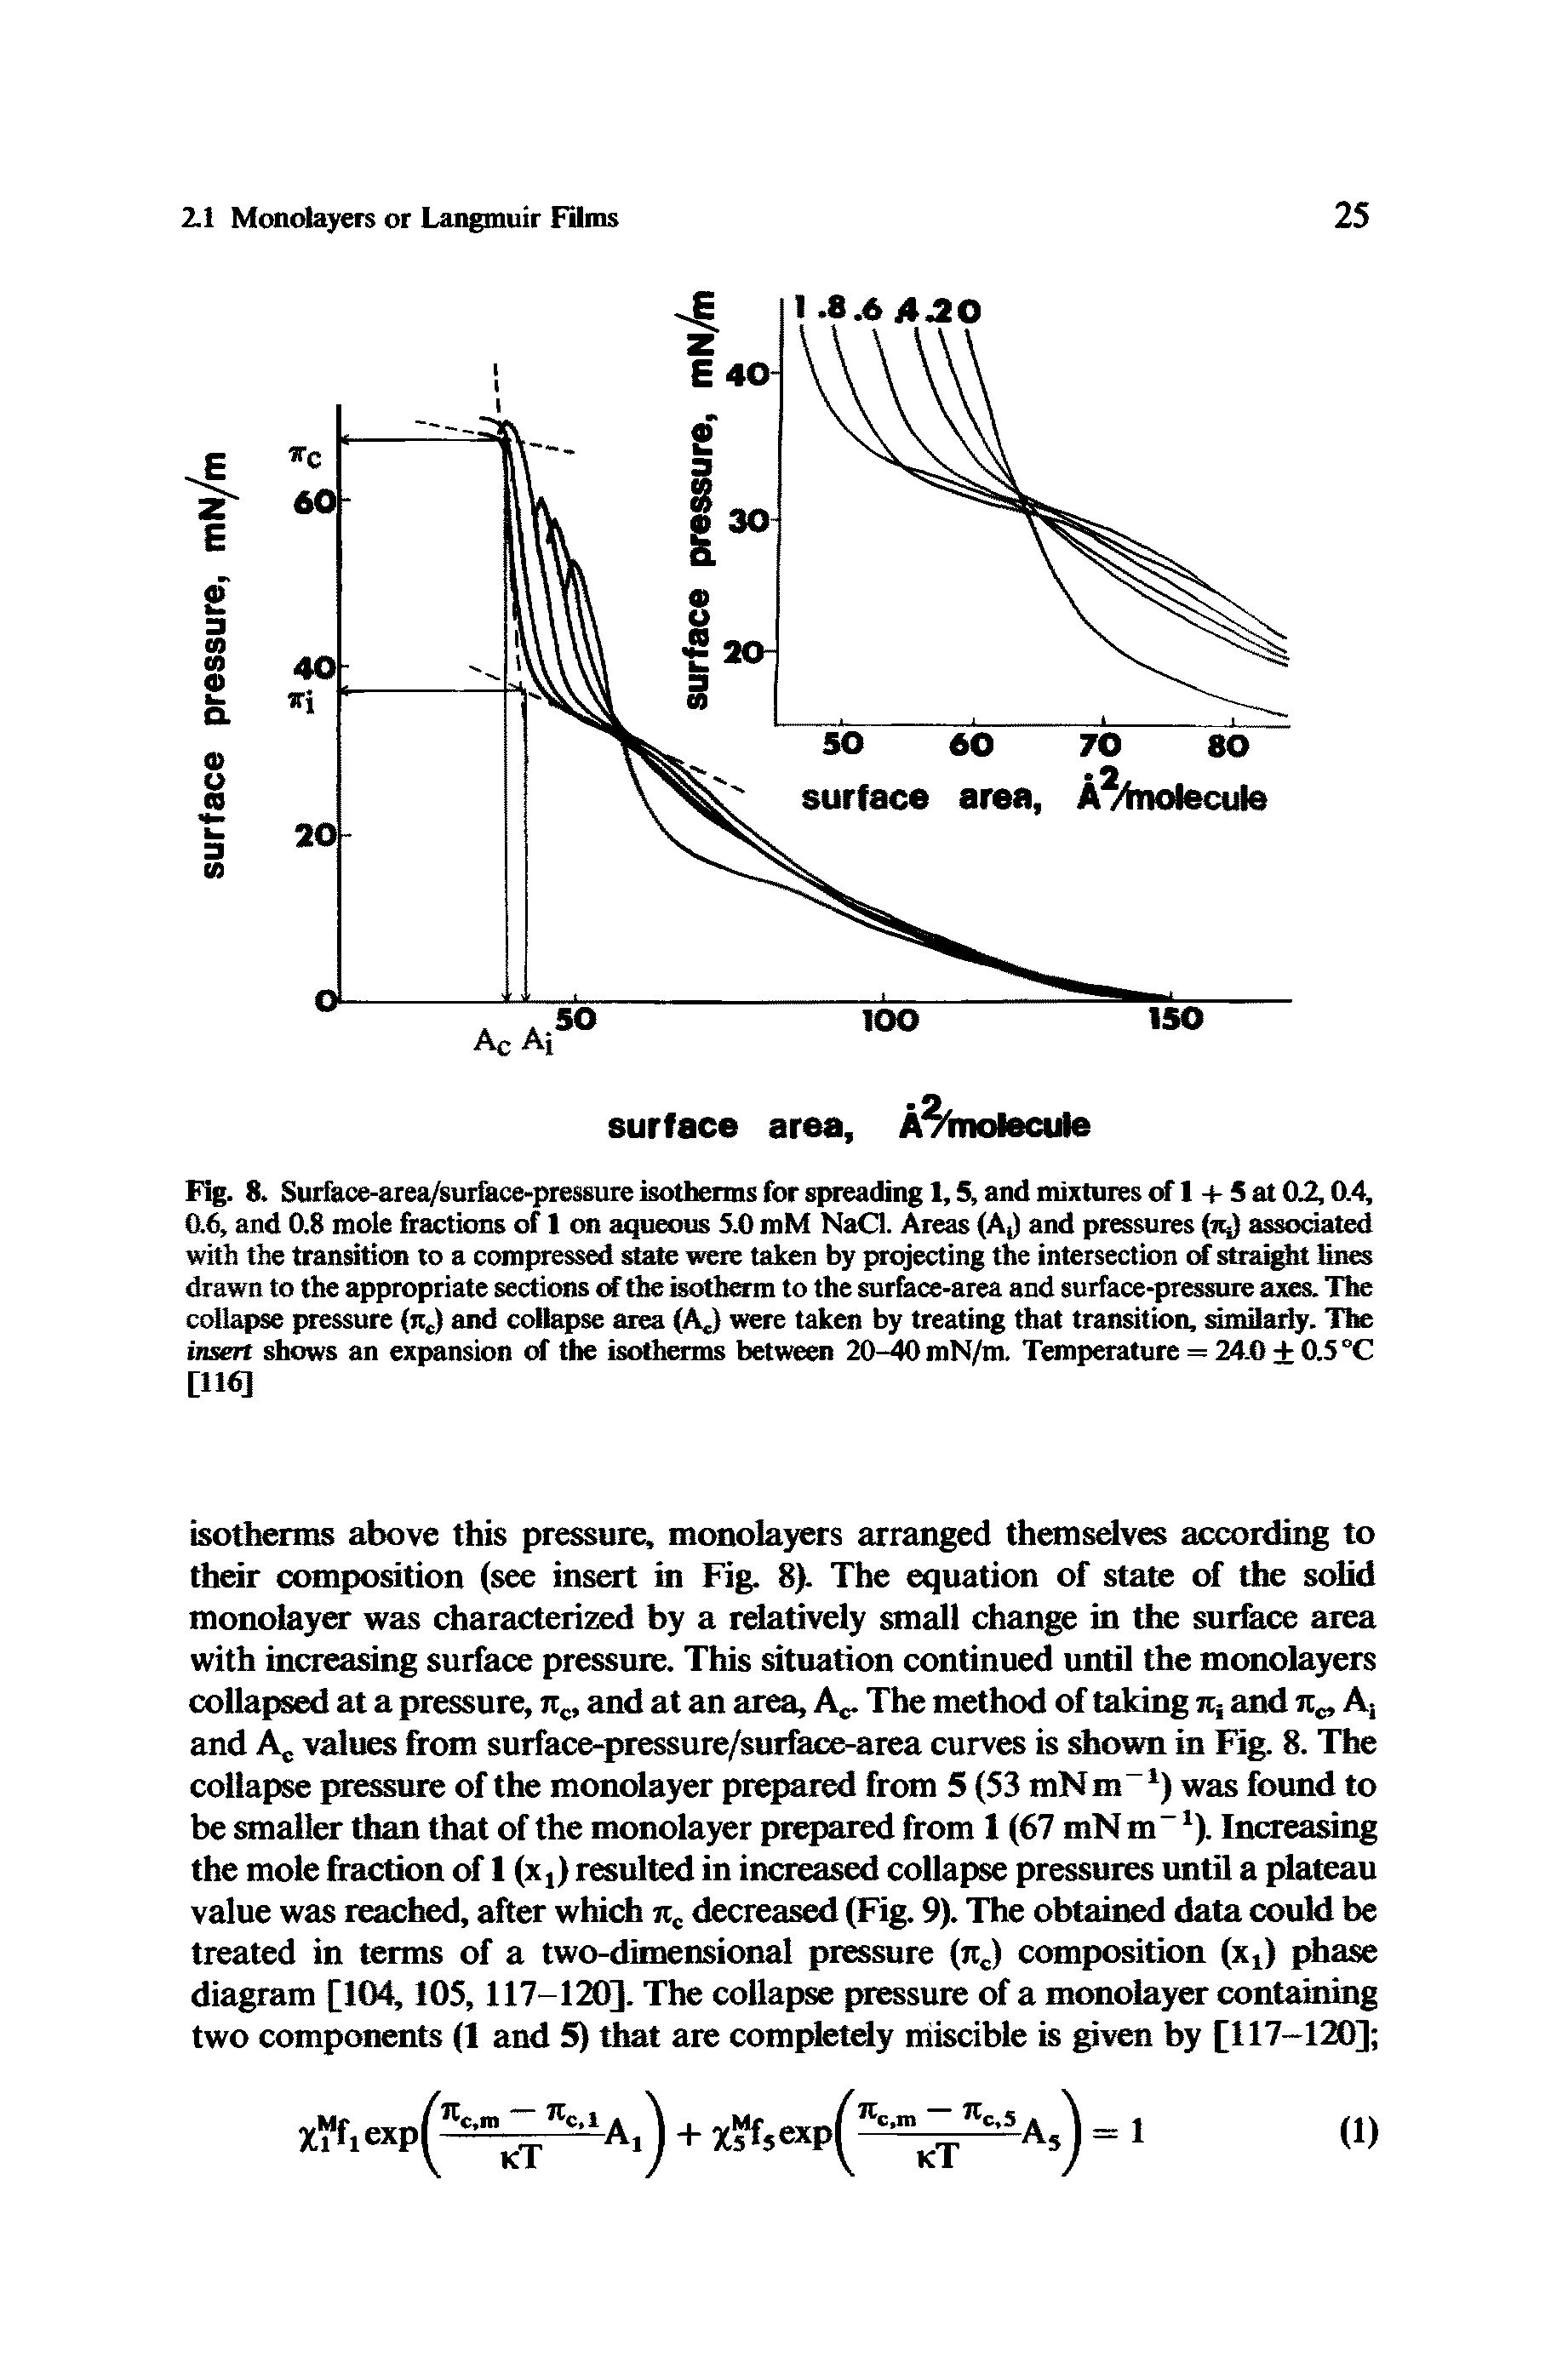 Fig. 8. Surface-area/surface-pressure isotherms for spreading 1,5, and mixtures of 1 + 5 at 0.2,0.4, 0.6, and 0.8 mole fractions of 1 on aqueous S.O mM NaCl. Areas (A,) and pressures (iq) associated with the transition to a compressed state were taken by projecting the intersection of straight lines drawn to the appropriate sections of the isotherm to the surface-area and surface-pressure axes. The collapse pressure (nc) and collapse area (Ac) were taken by treating that transition, similarly. The insert shows an expansion of the isotherms between 20-40 mN/m. Temperature = 24.0 + 0.5 °C [116]...